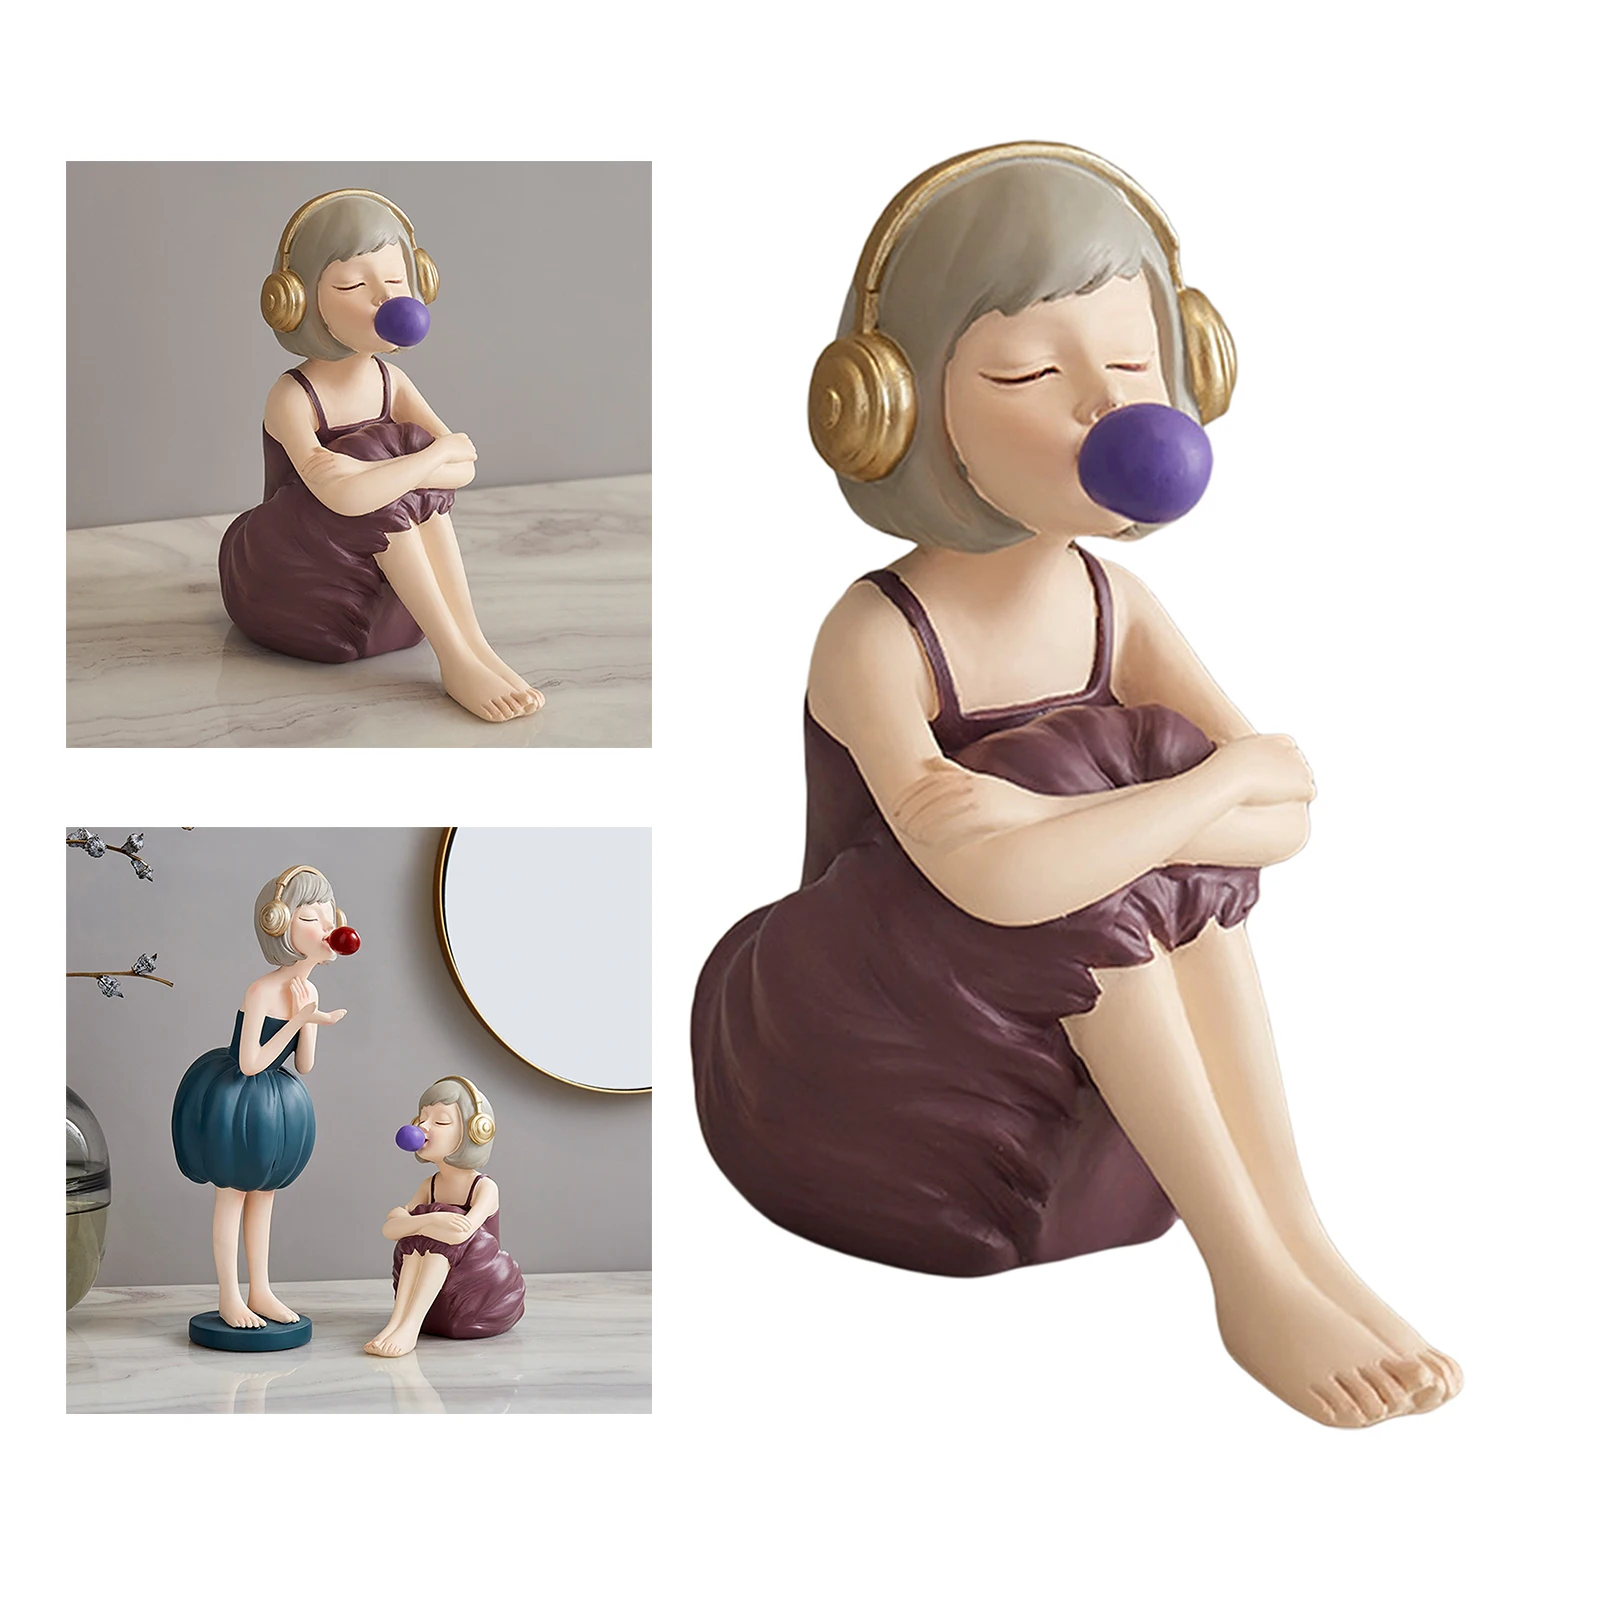 Bubble Girl Figurine Lovely Crafts Collectible Statue Living Room Bedroom Kids Room Office Desk Wedding Decor Birthday Gift